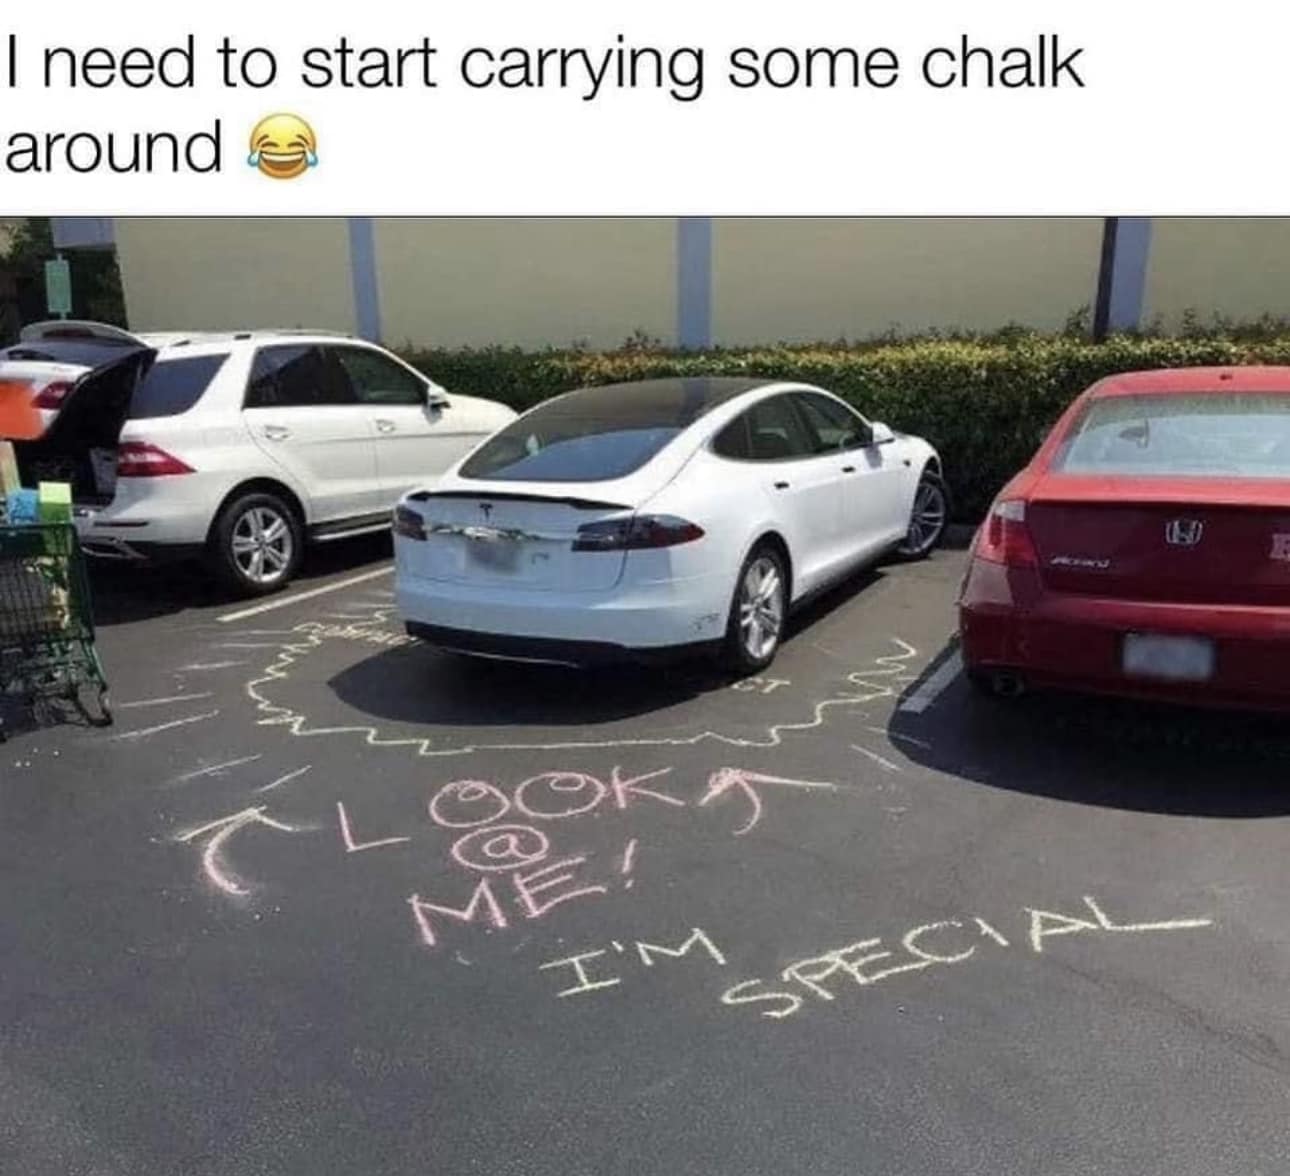 i need to start carrying chalk around, look at me, i'm special, bad driver, karma